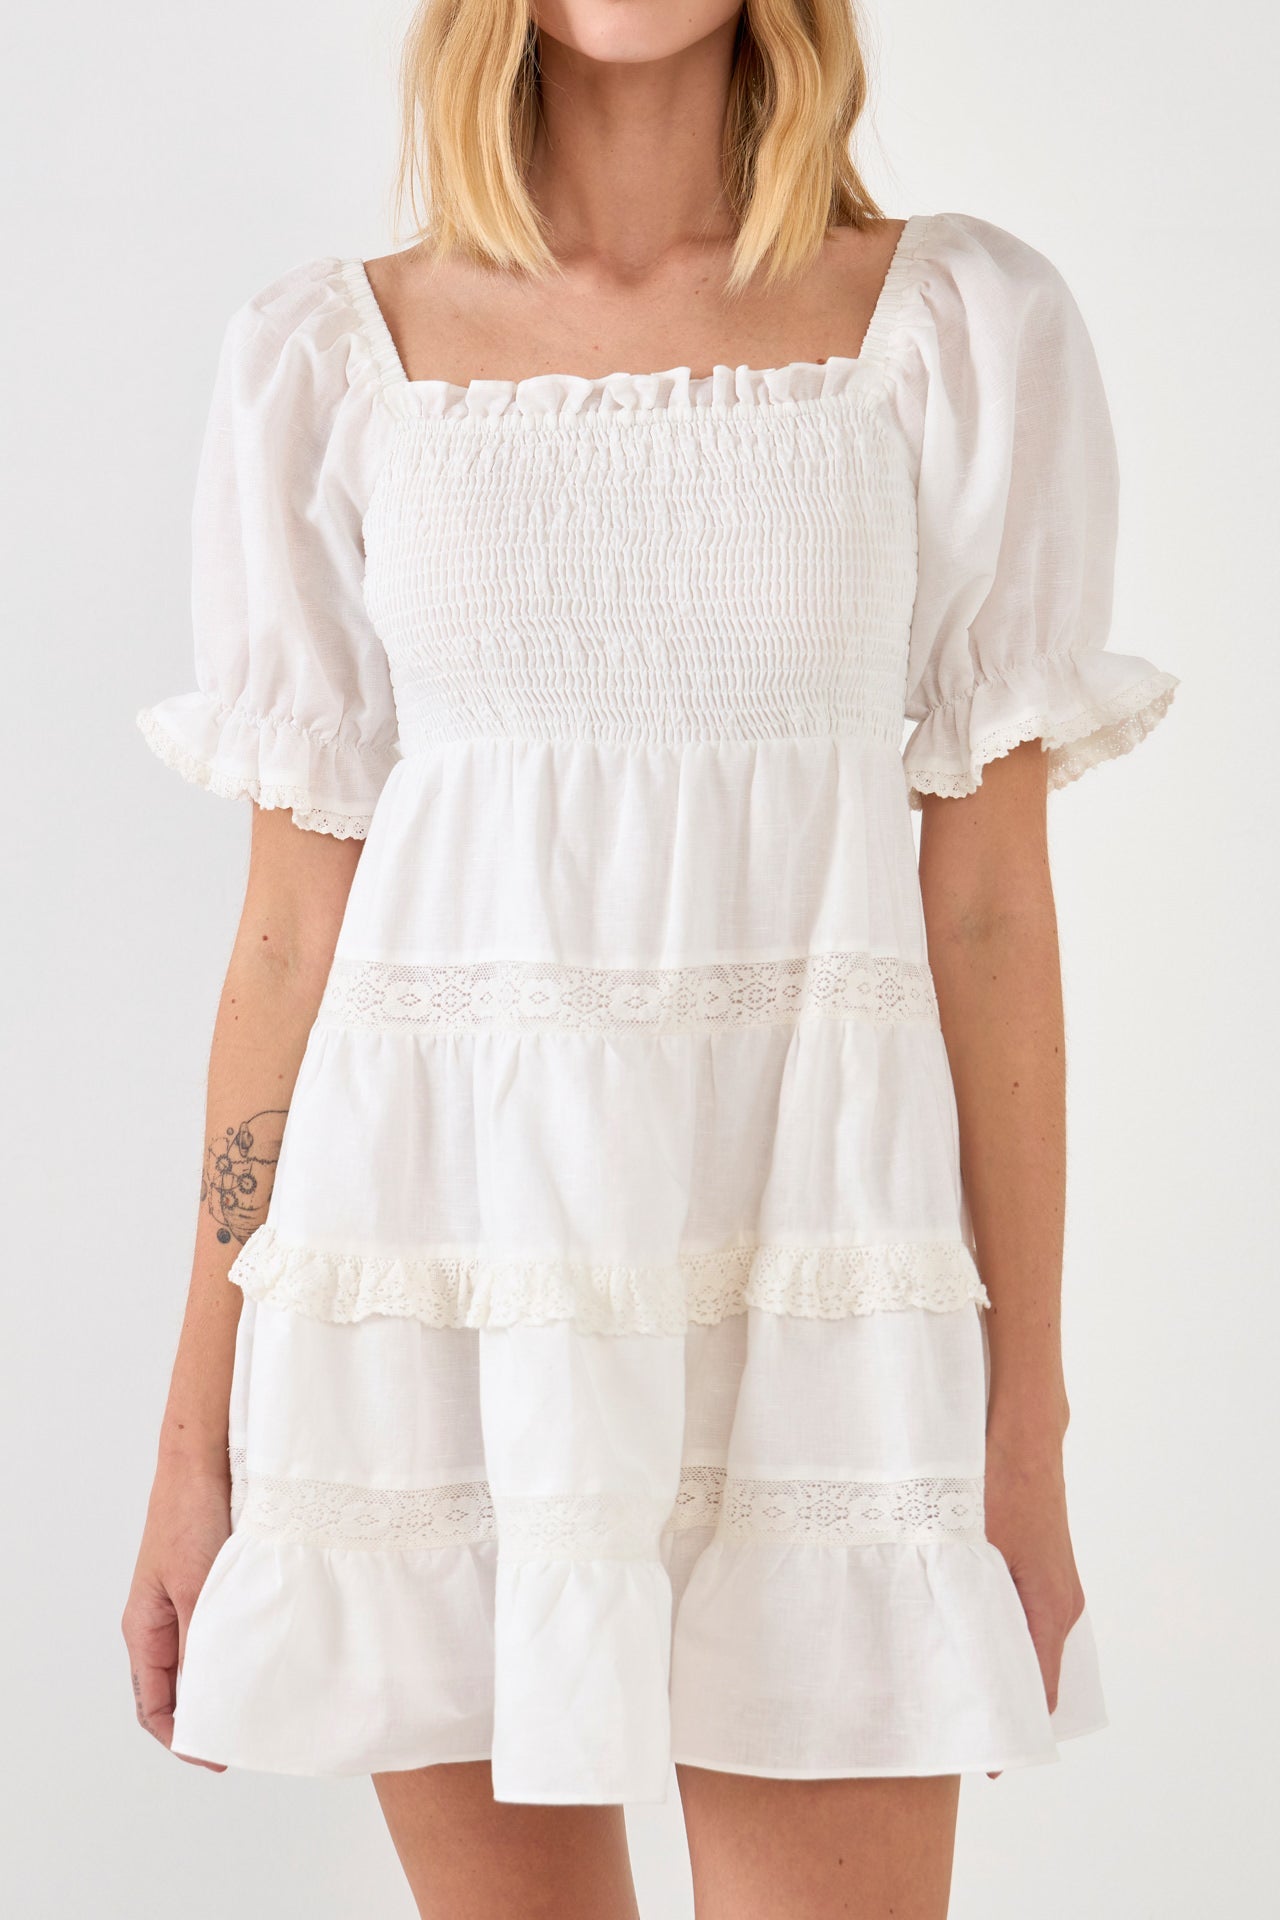 Endless Rose - Linen Smocked Mini Dress with Lace - Dresses in Women's Clothing available at endlessrose.com